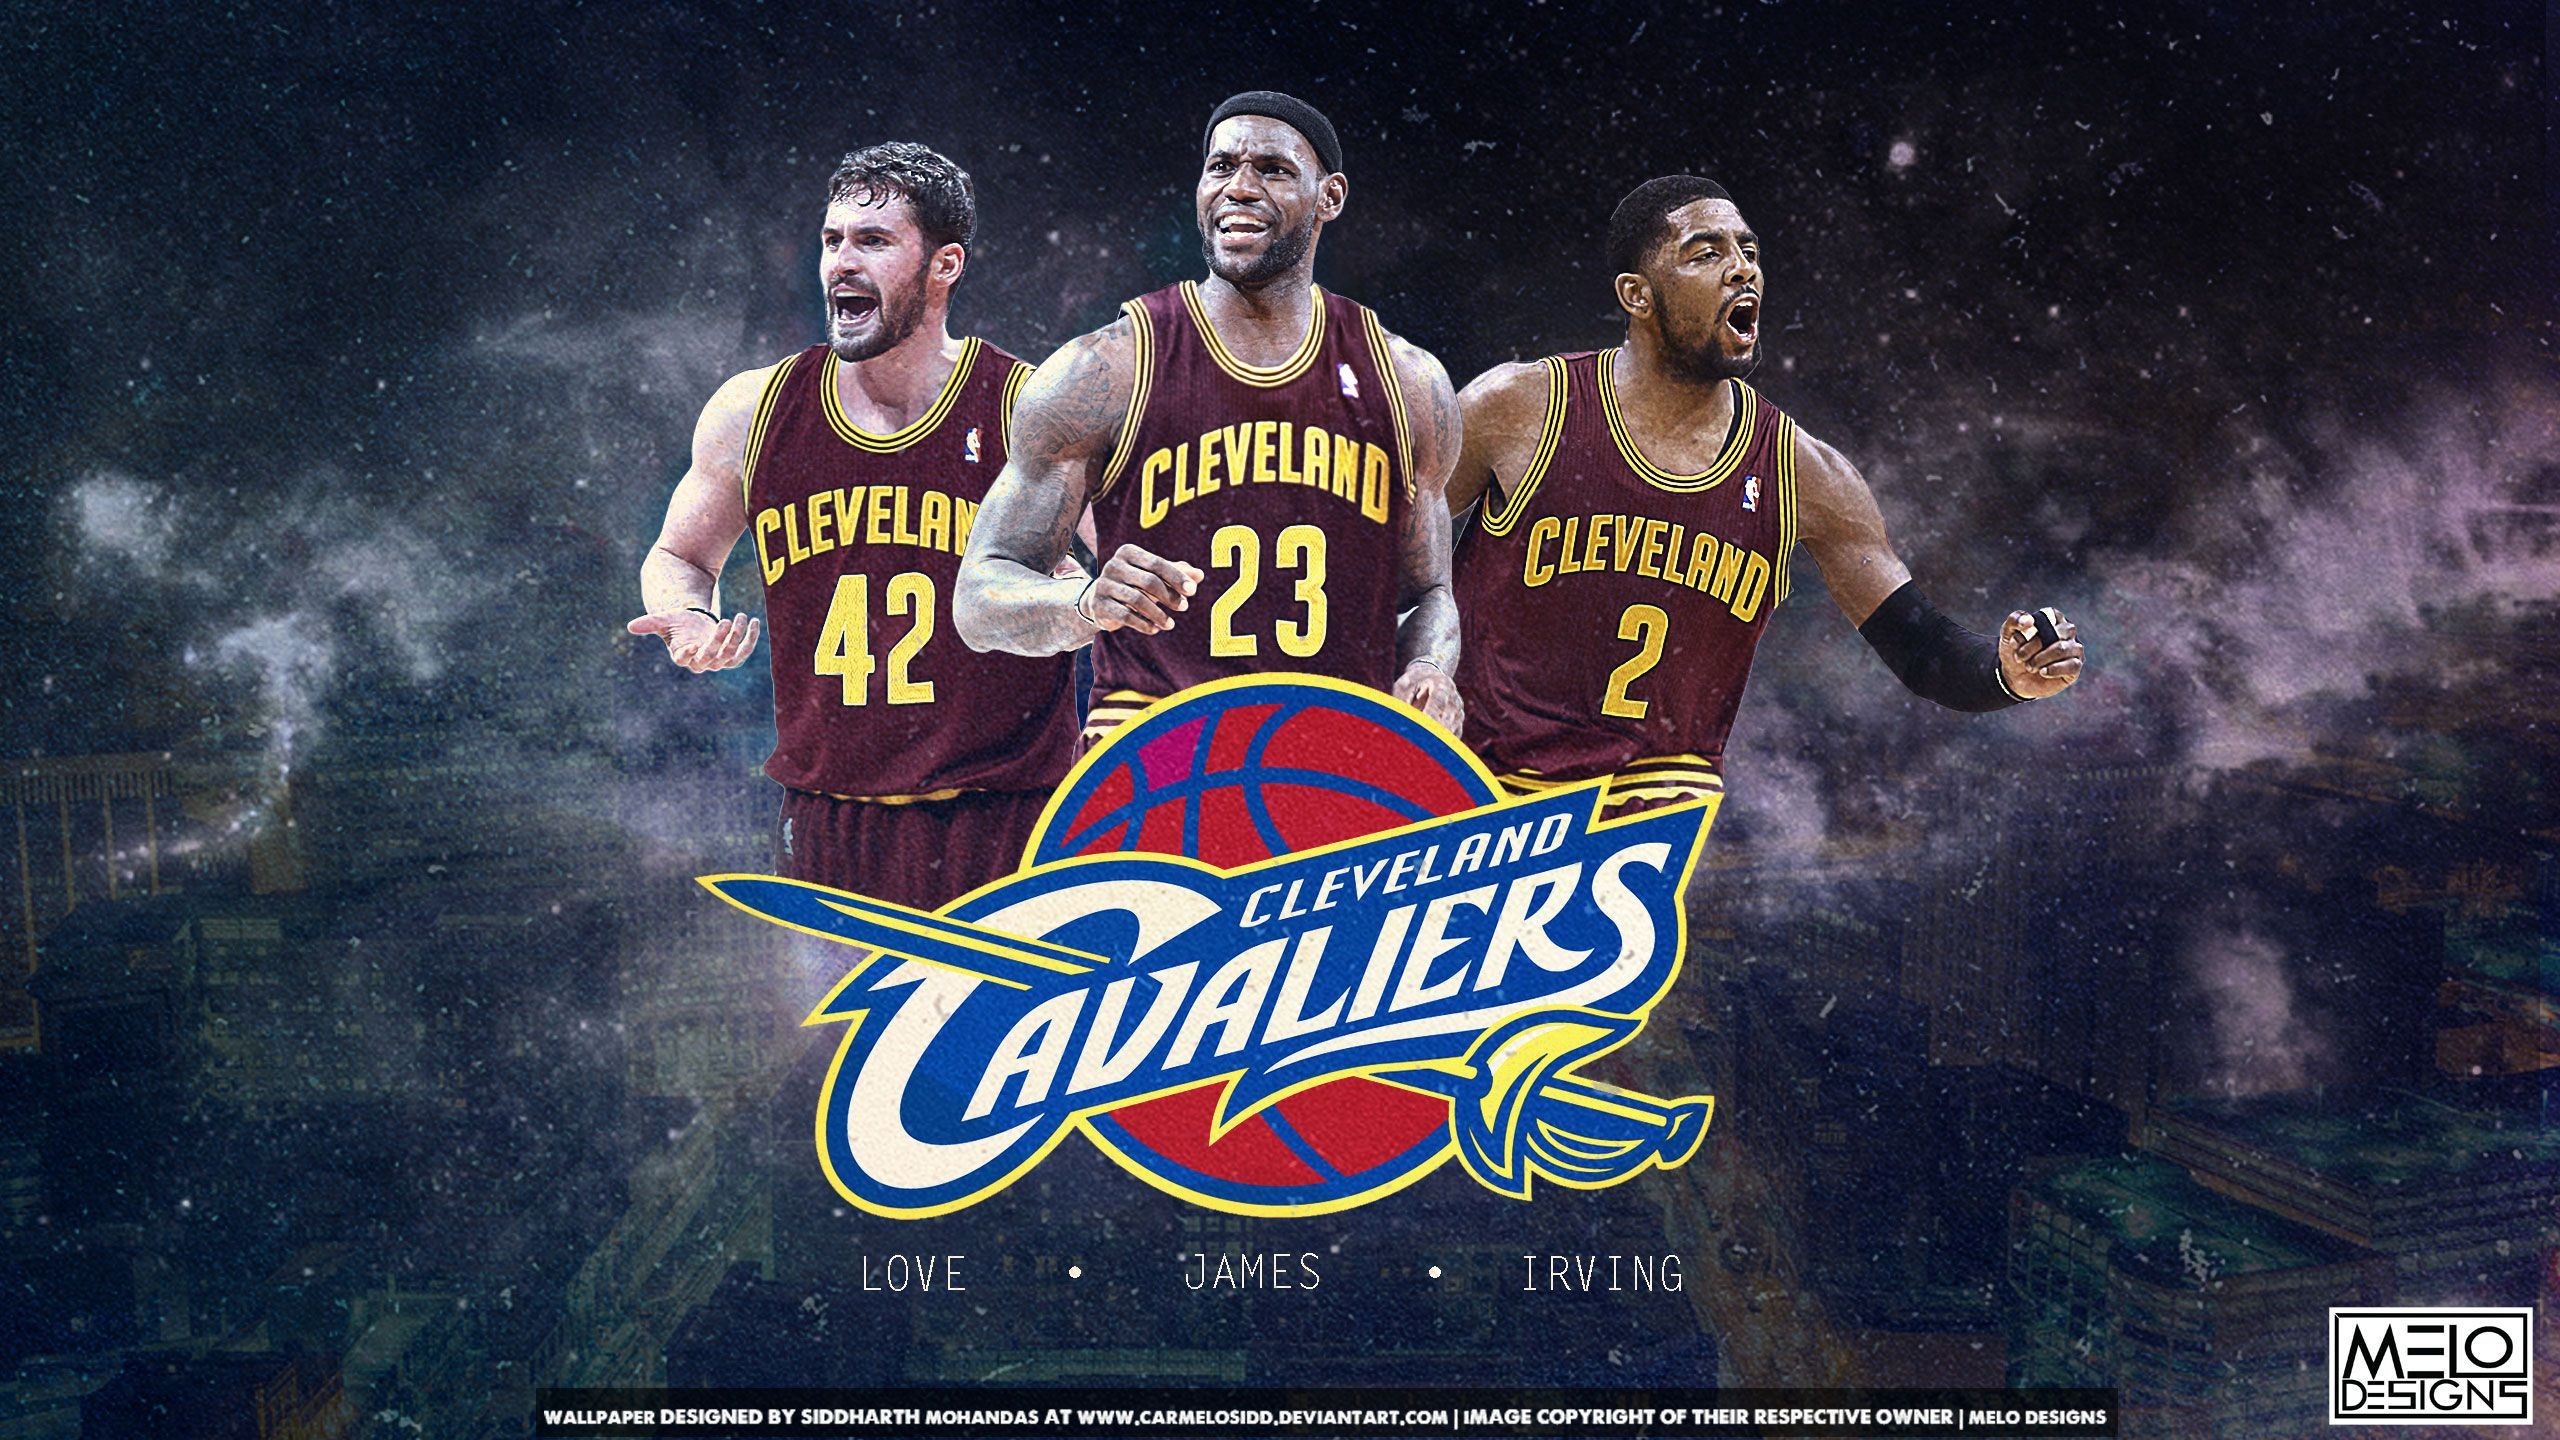 2560x1440 Search Results for “big 3 cleveland wallpaper” – Adorable Wallpapers